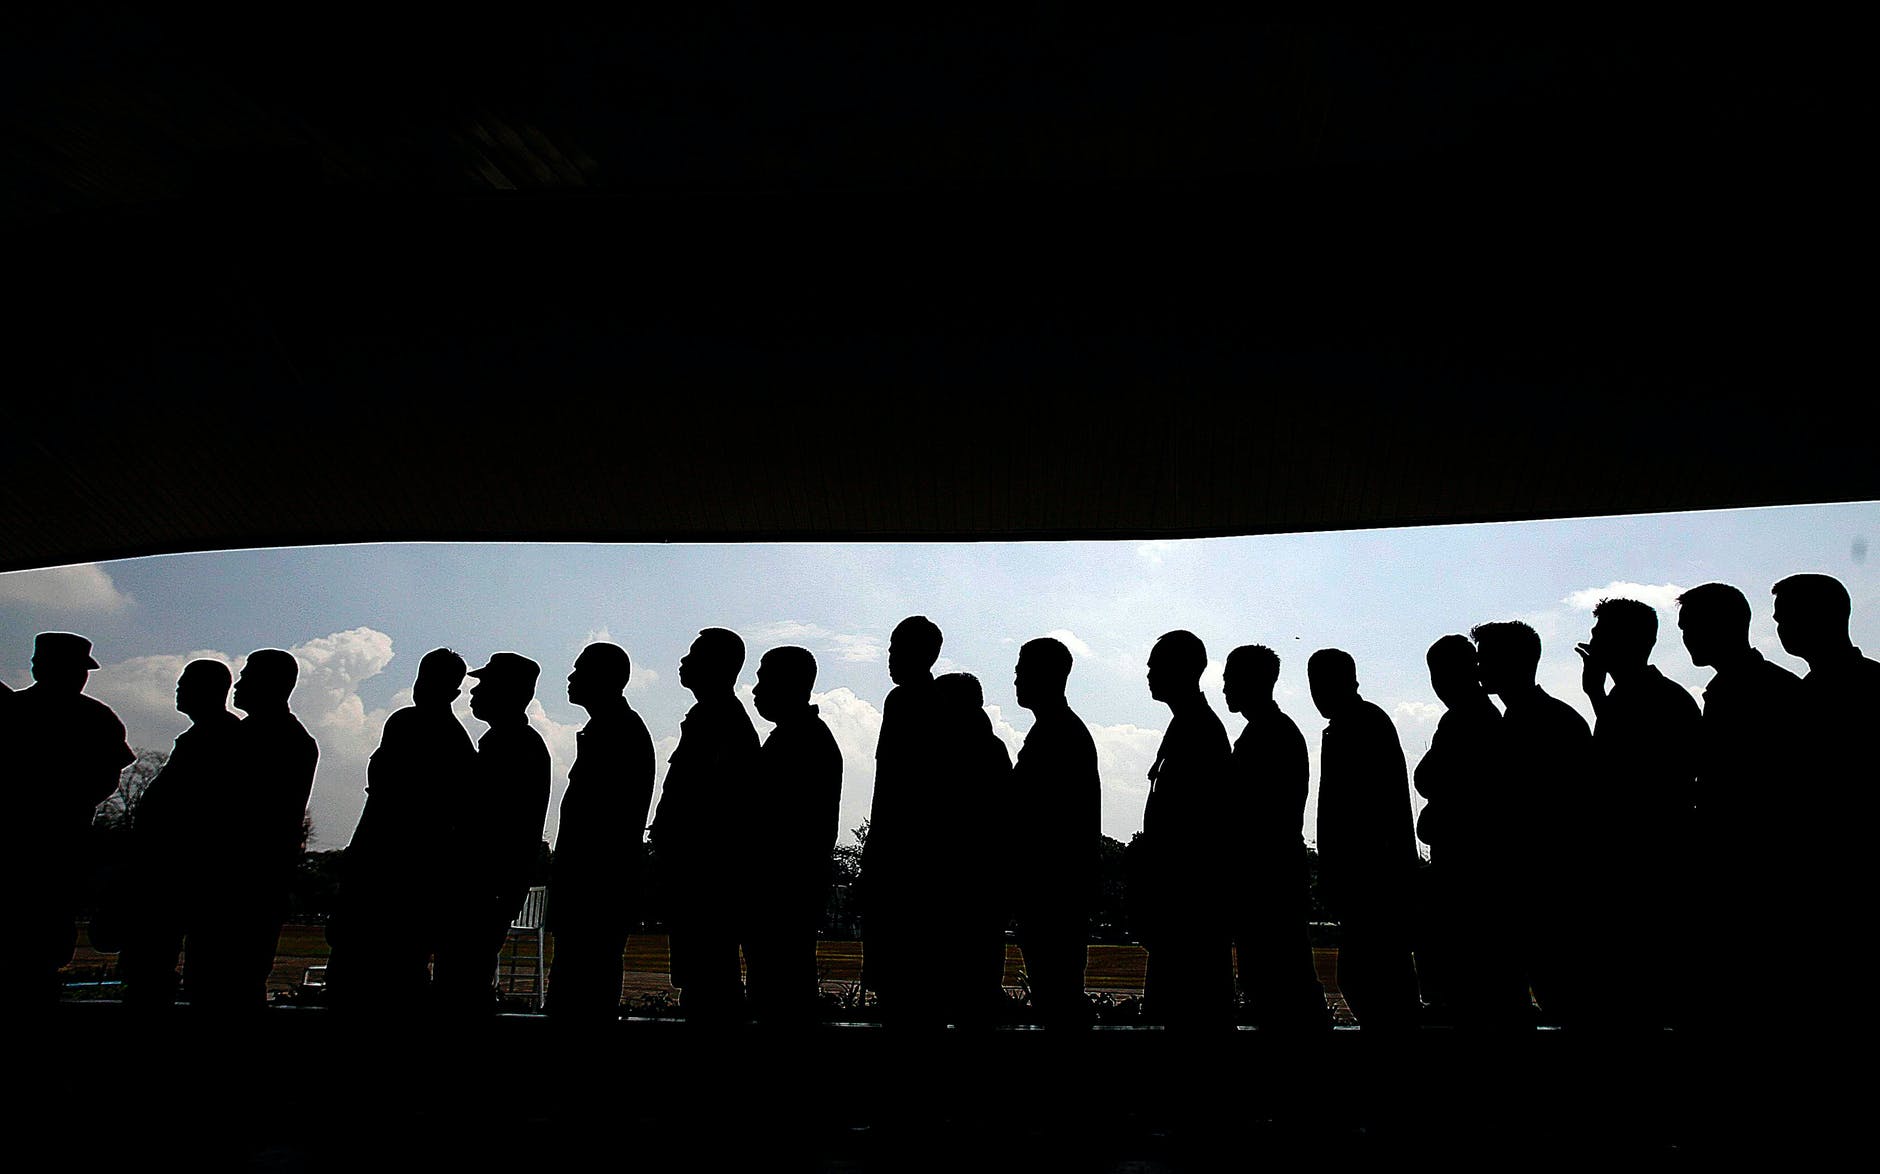 Silhouette of people waiting in line